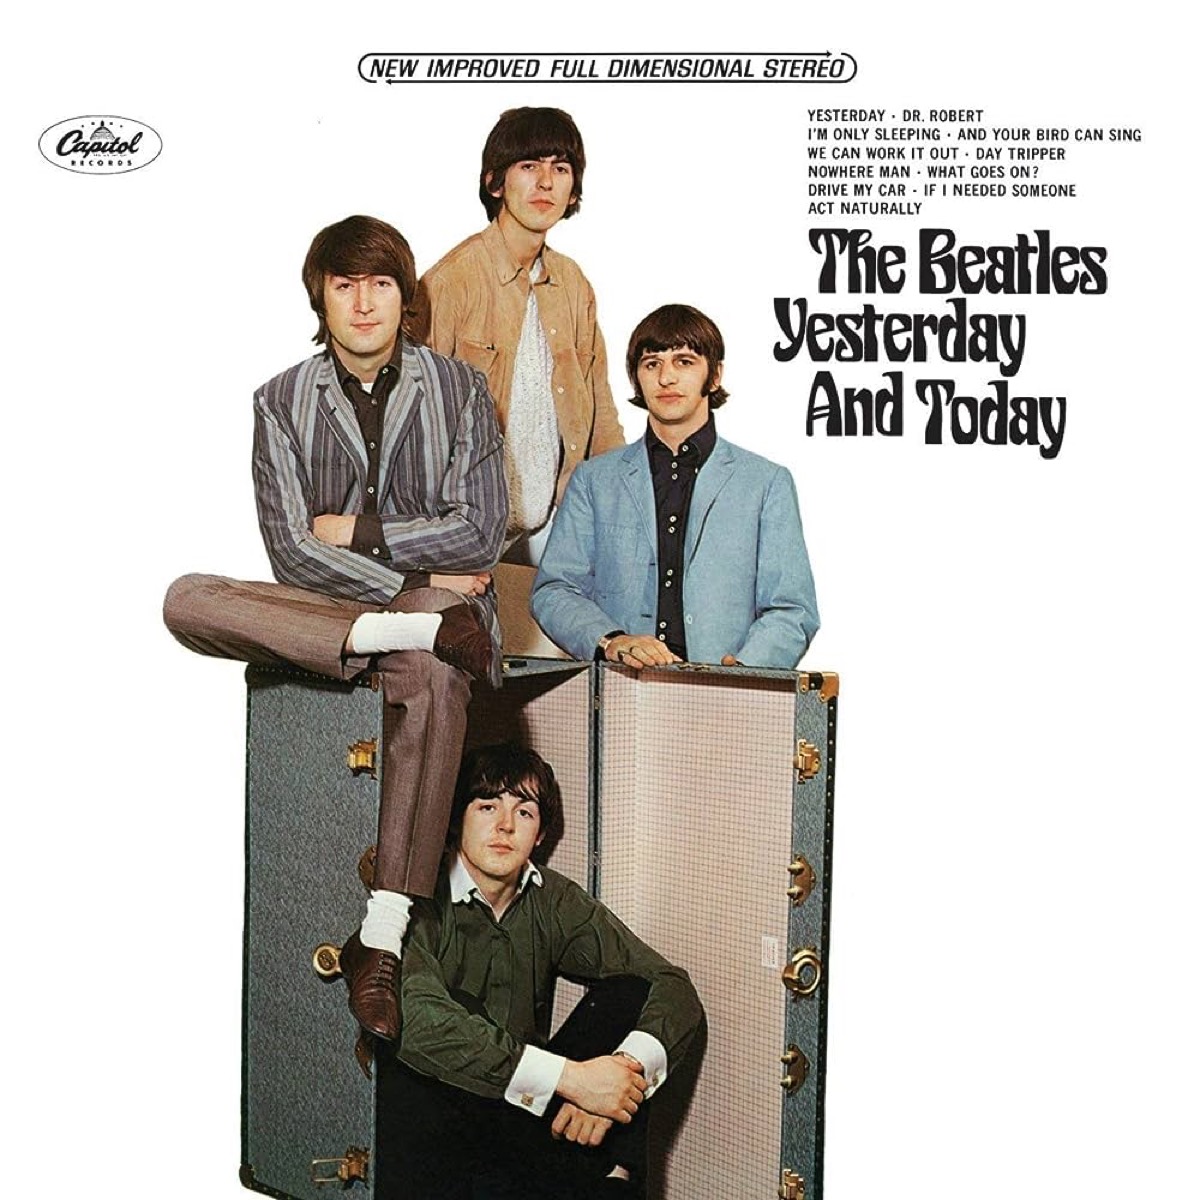 Yesterday and Today by The Beatles cover art